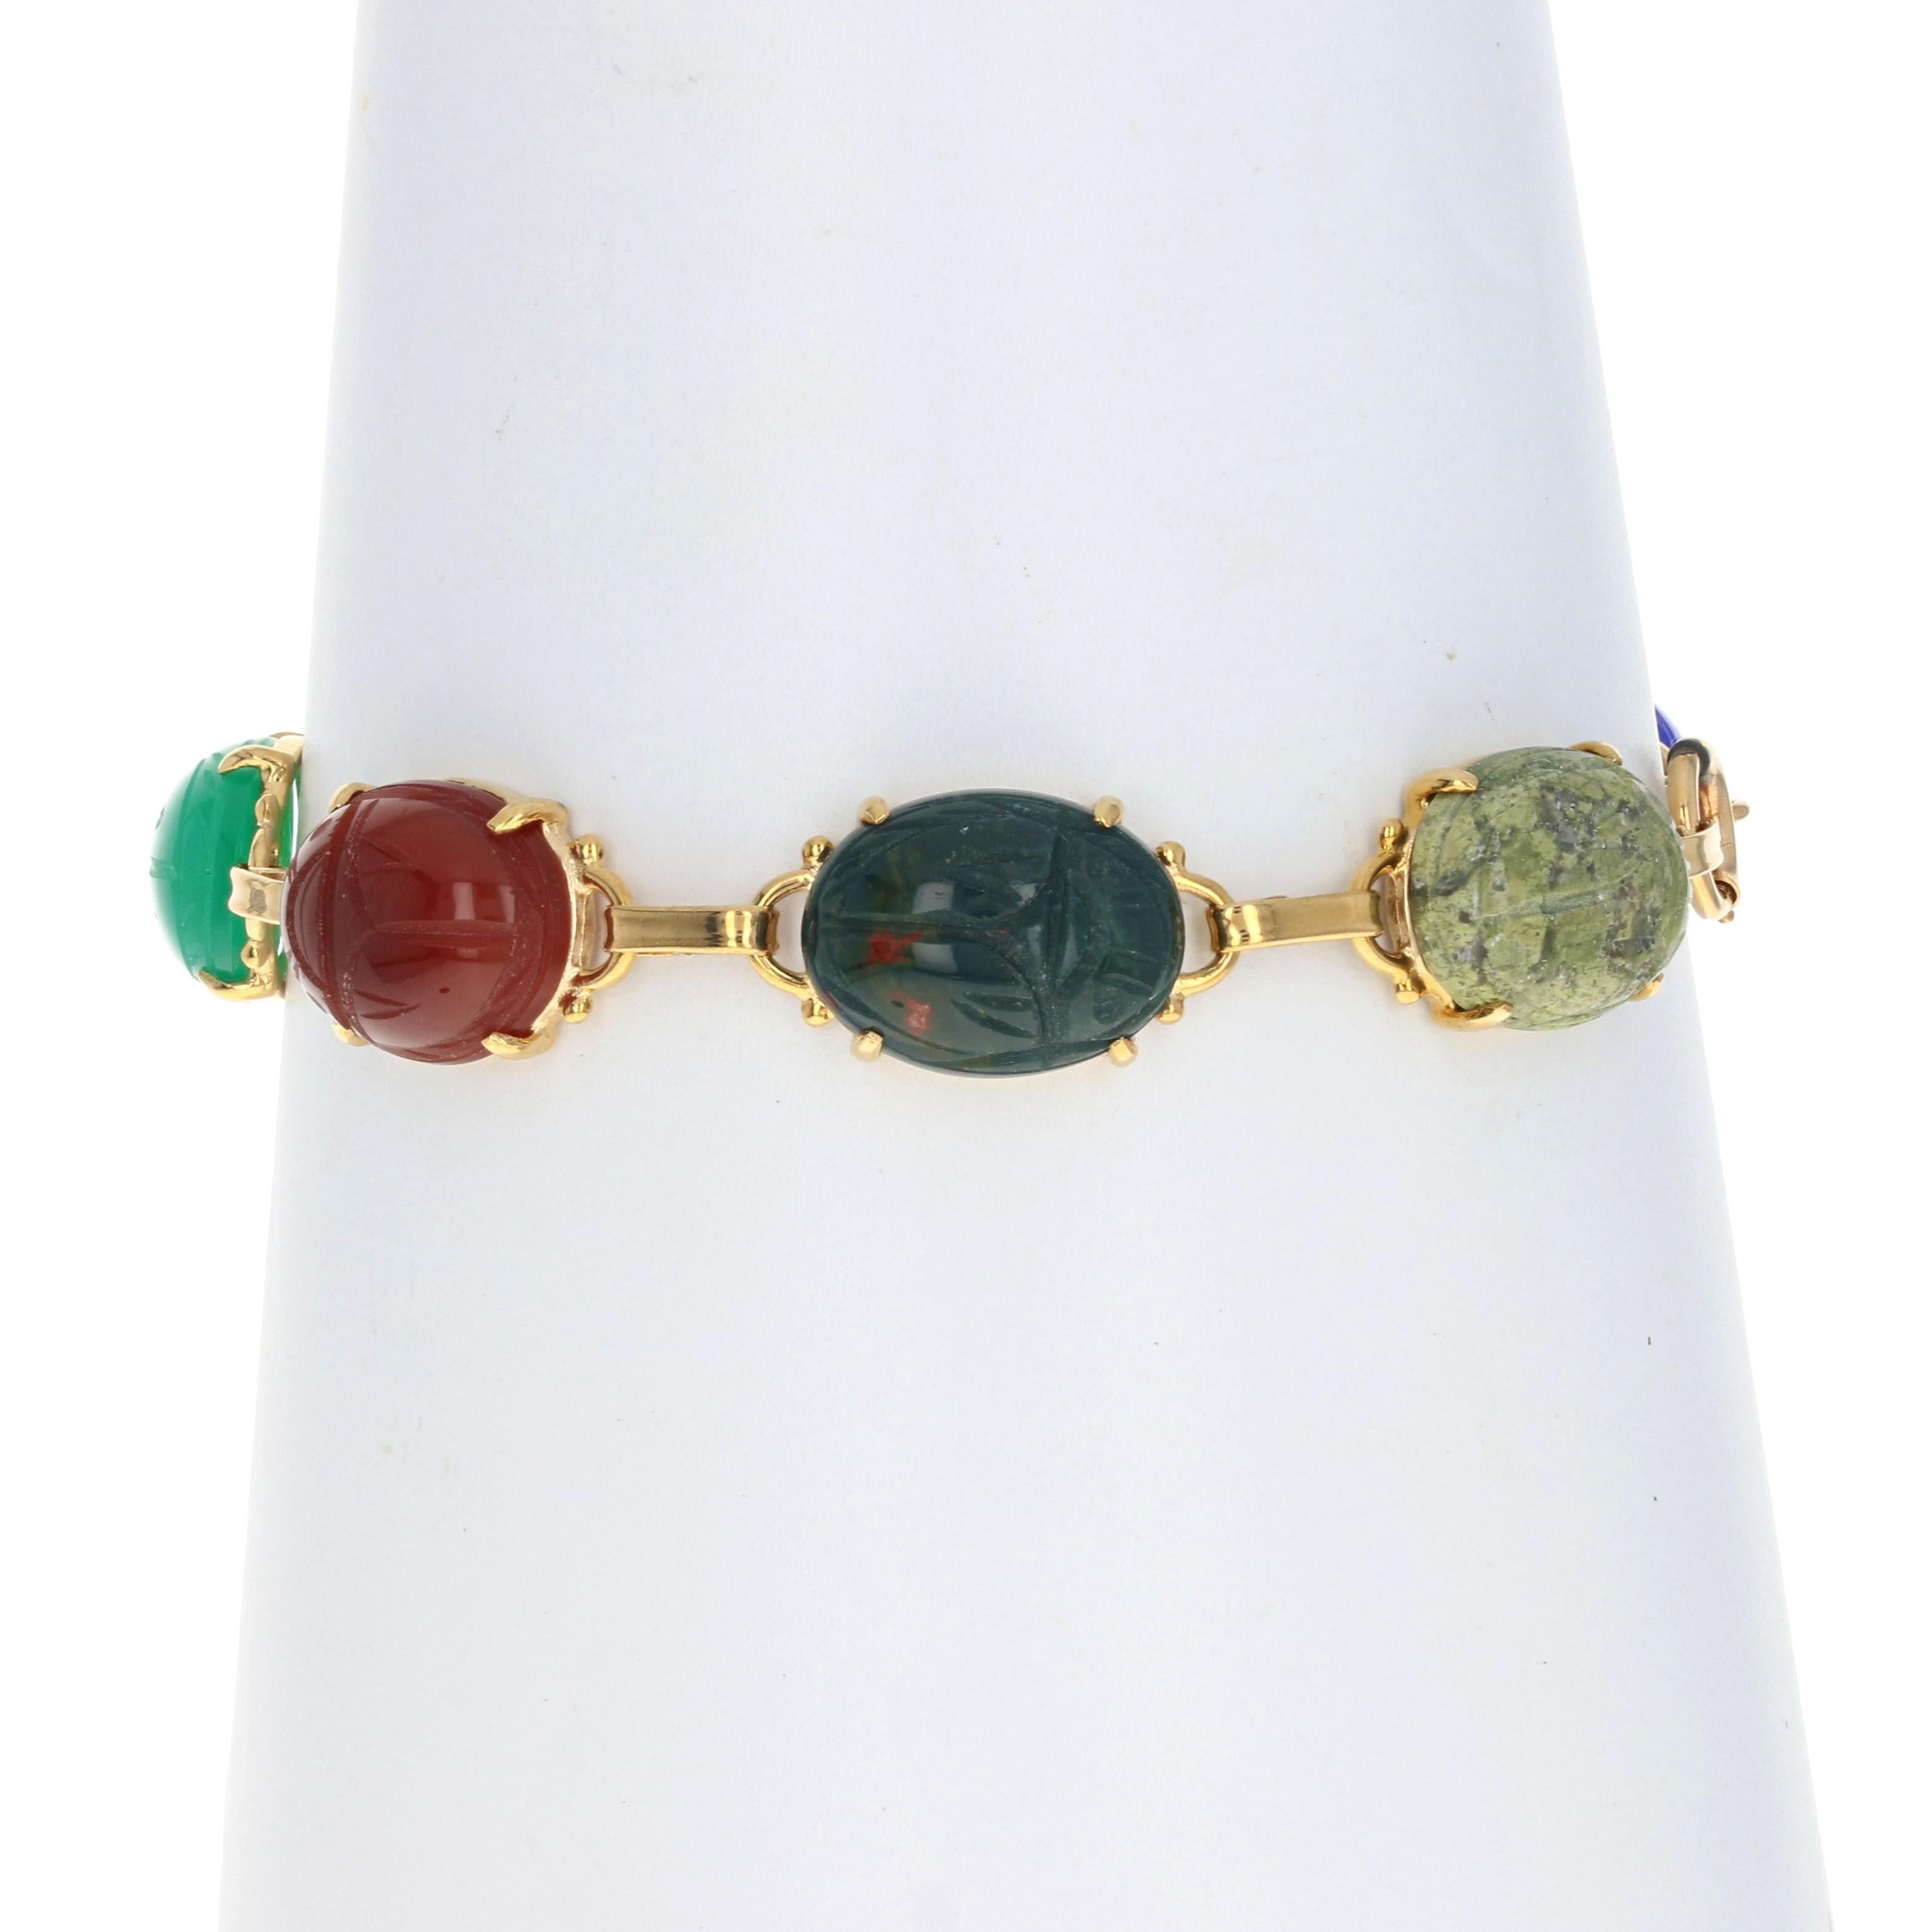 With bold color and refined style, this exquisite bracelet is destined to become a signature piece in your jewelry collection! This 14k yellow gold link bracelet showcases seven eye-catching gemstone cabochons which display carved scarab beetles